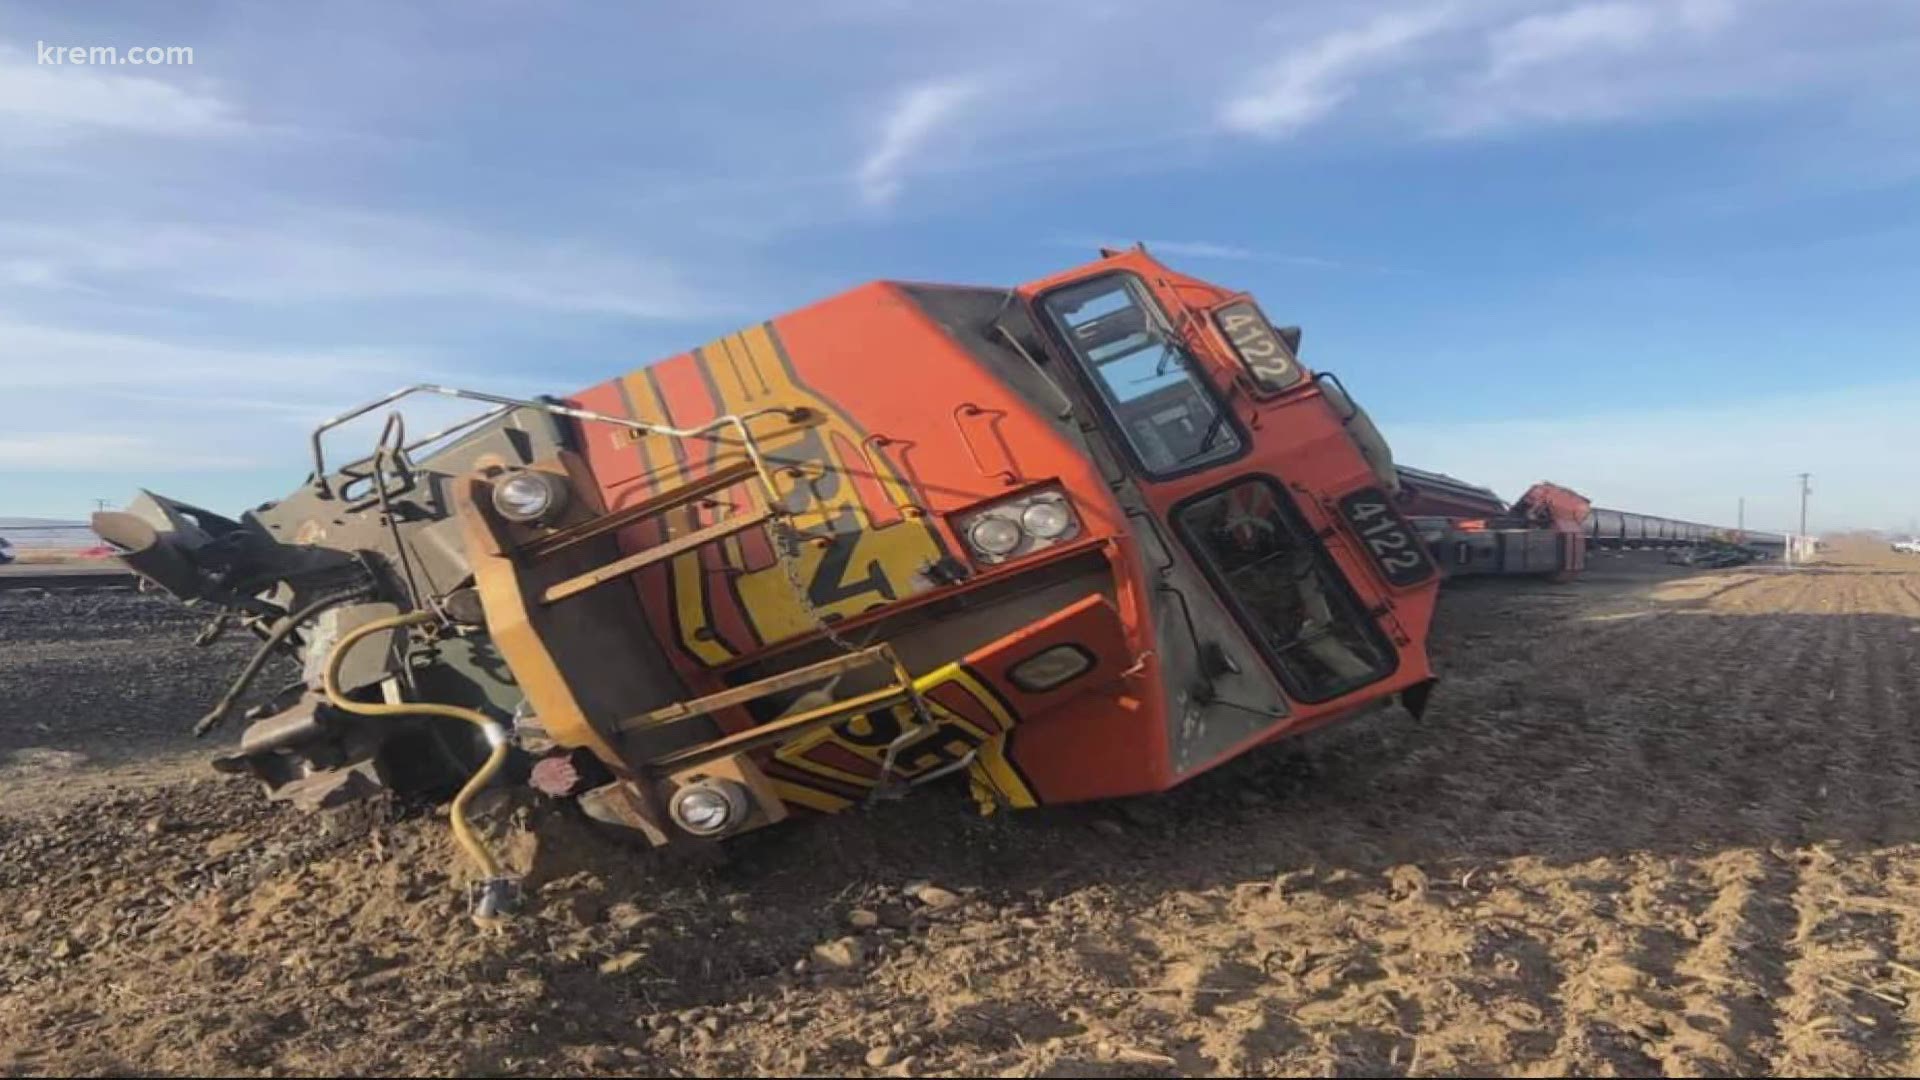 Three engines and seven cars of a BNSF train derailed near Mabton after a semi-truck hauling a piece of farm equipment hit it.